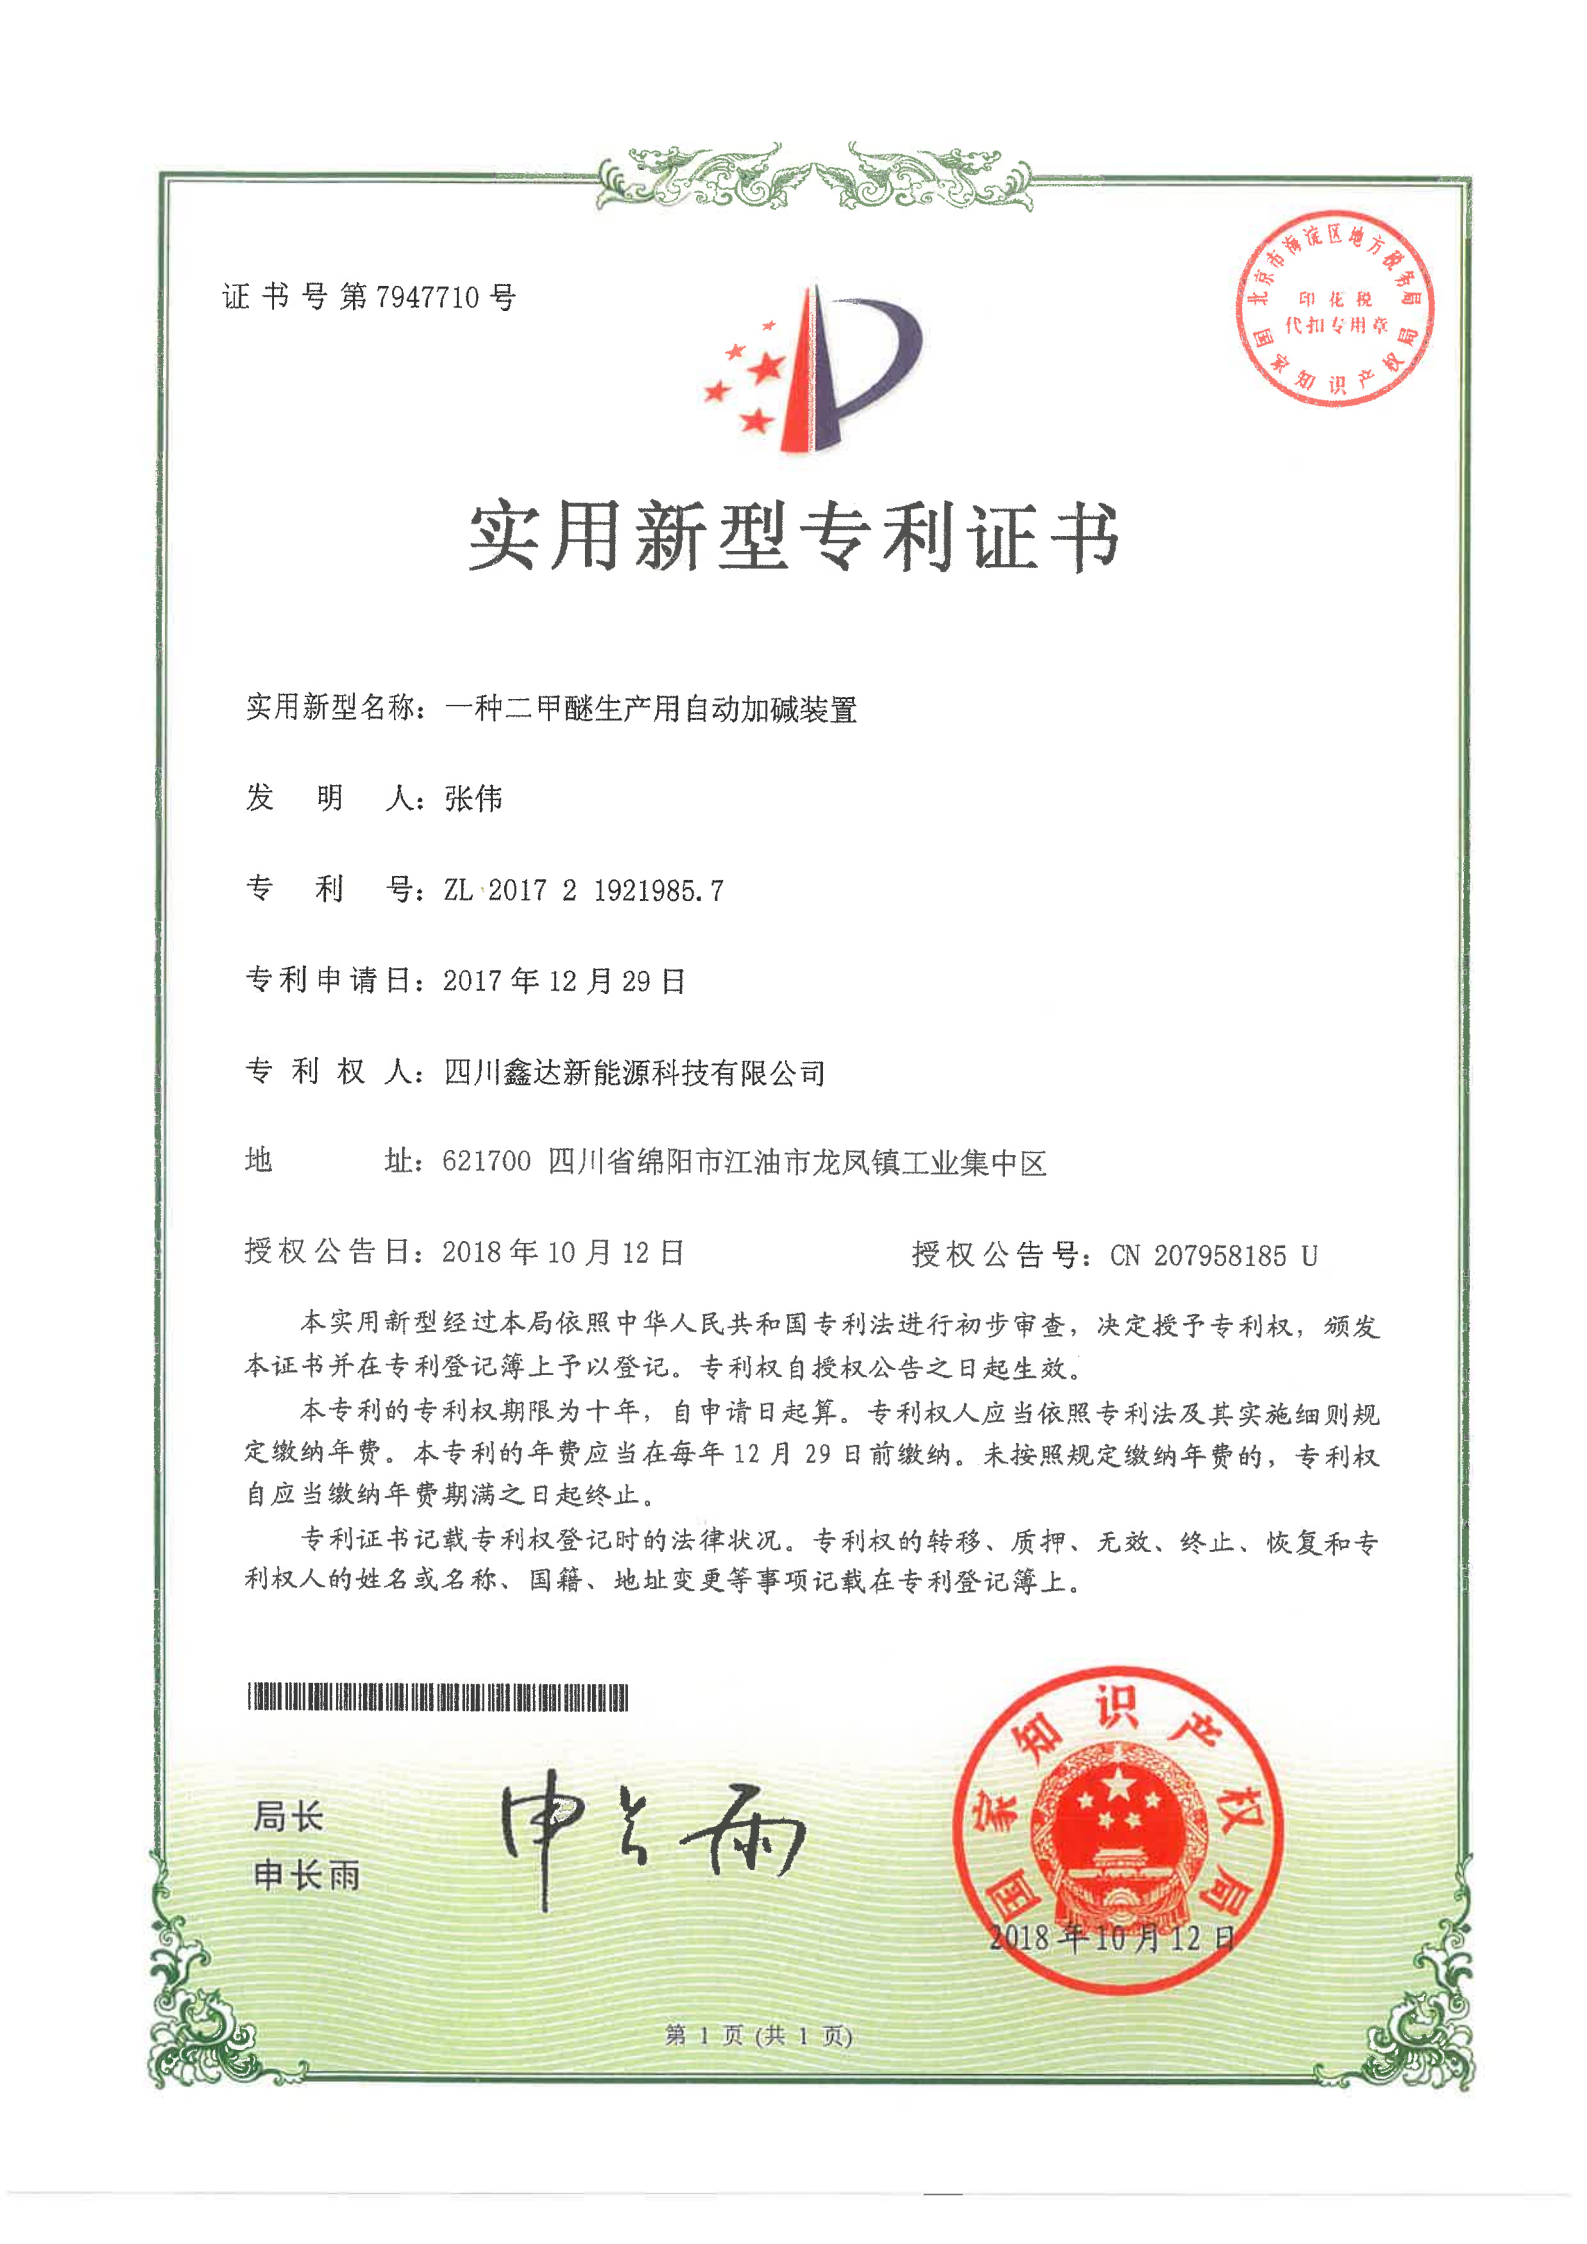 Chinese Patent:An Automatic Alkali Adding Device for dimethyl ether productioni